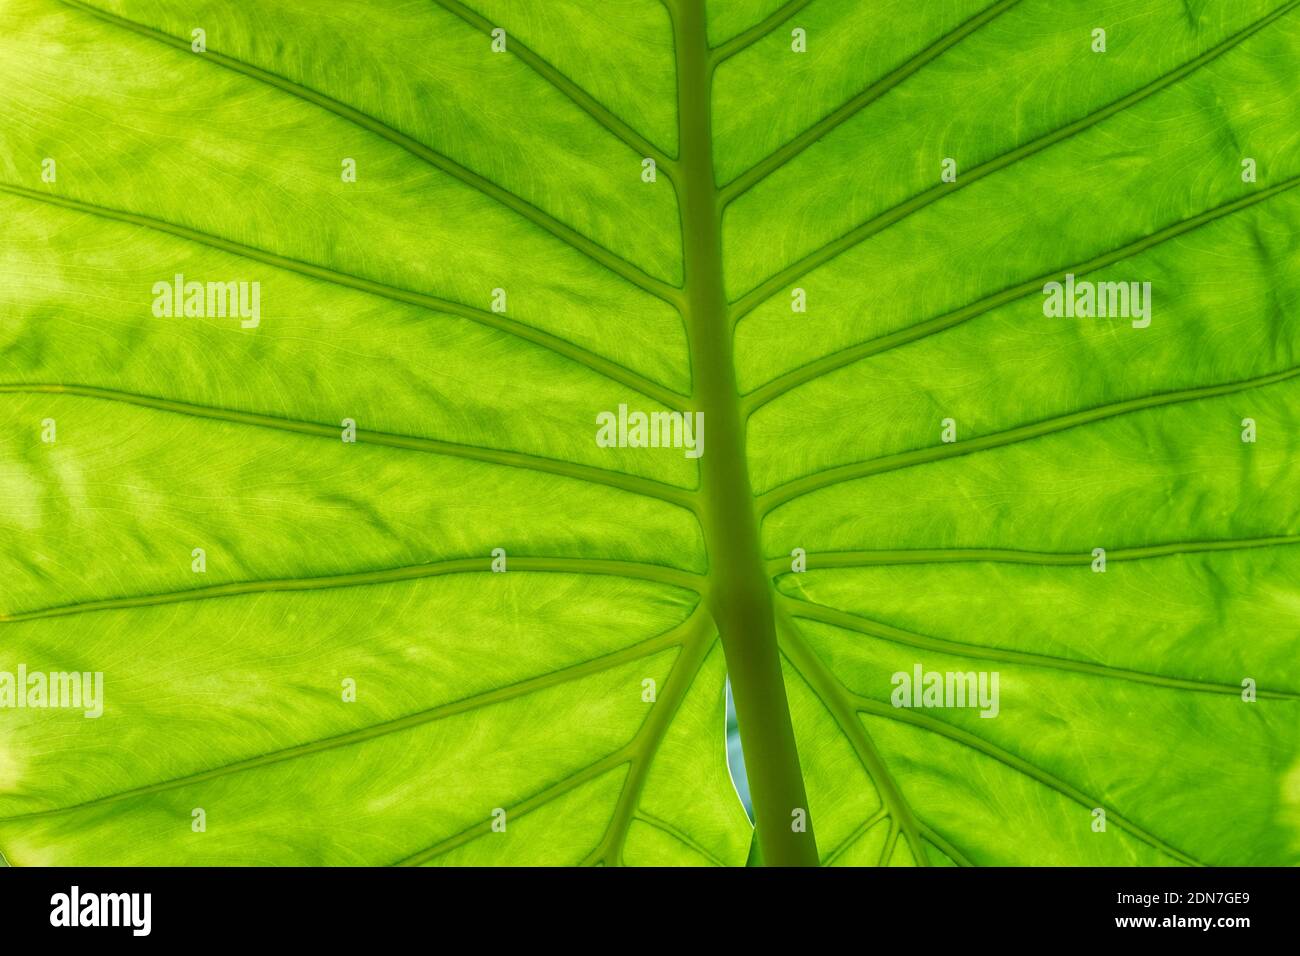 Back lighted green leaf, close up texture background Stock Photo